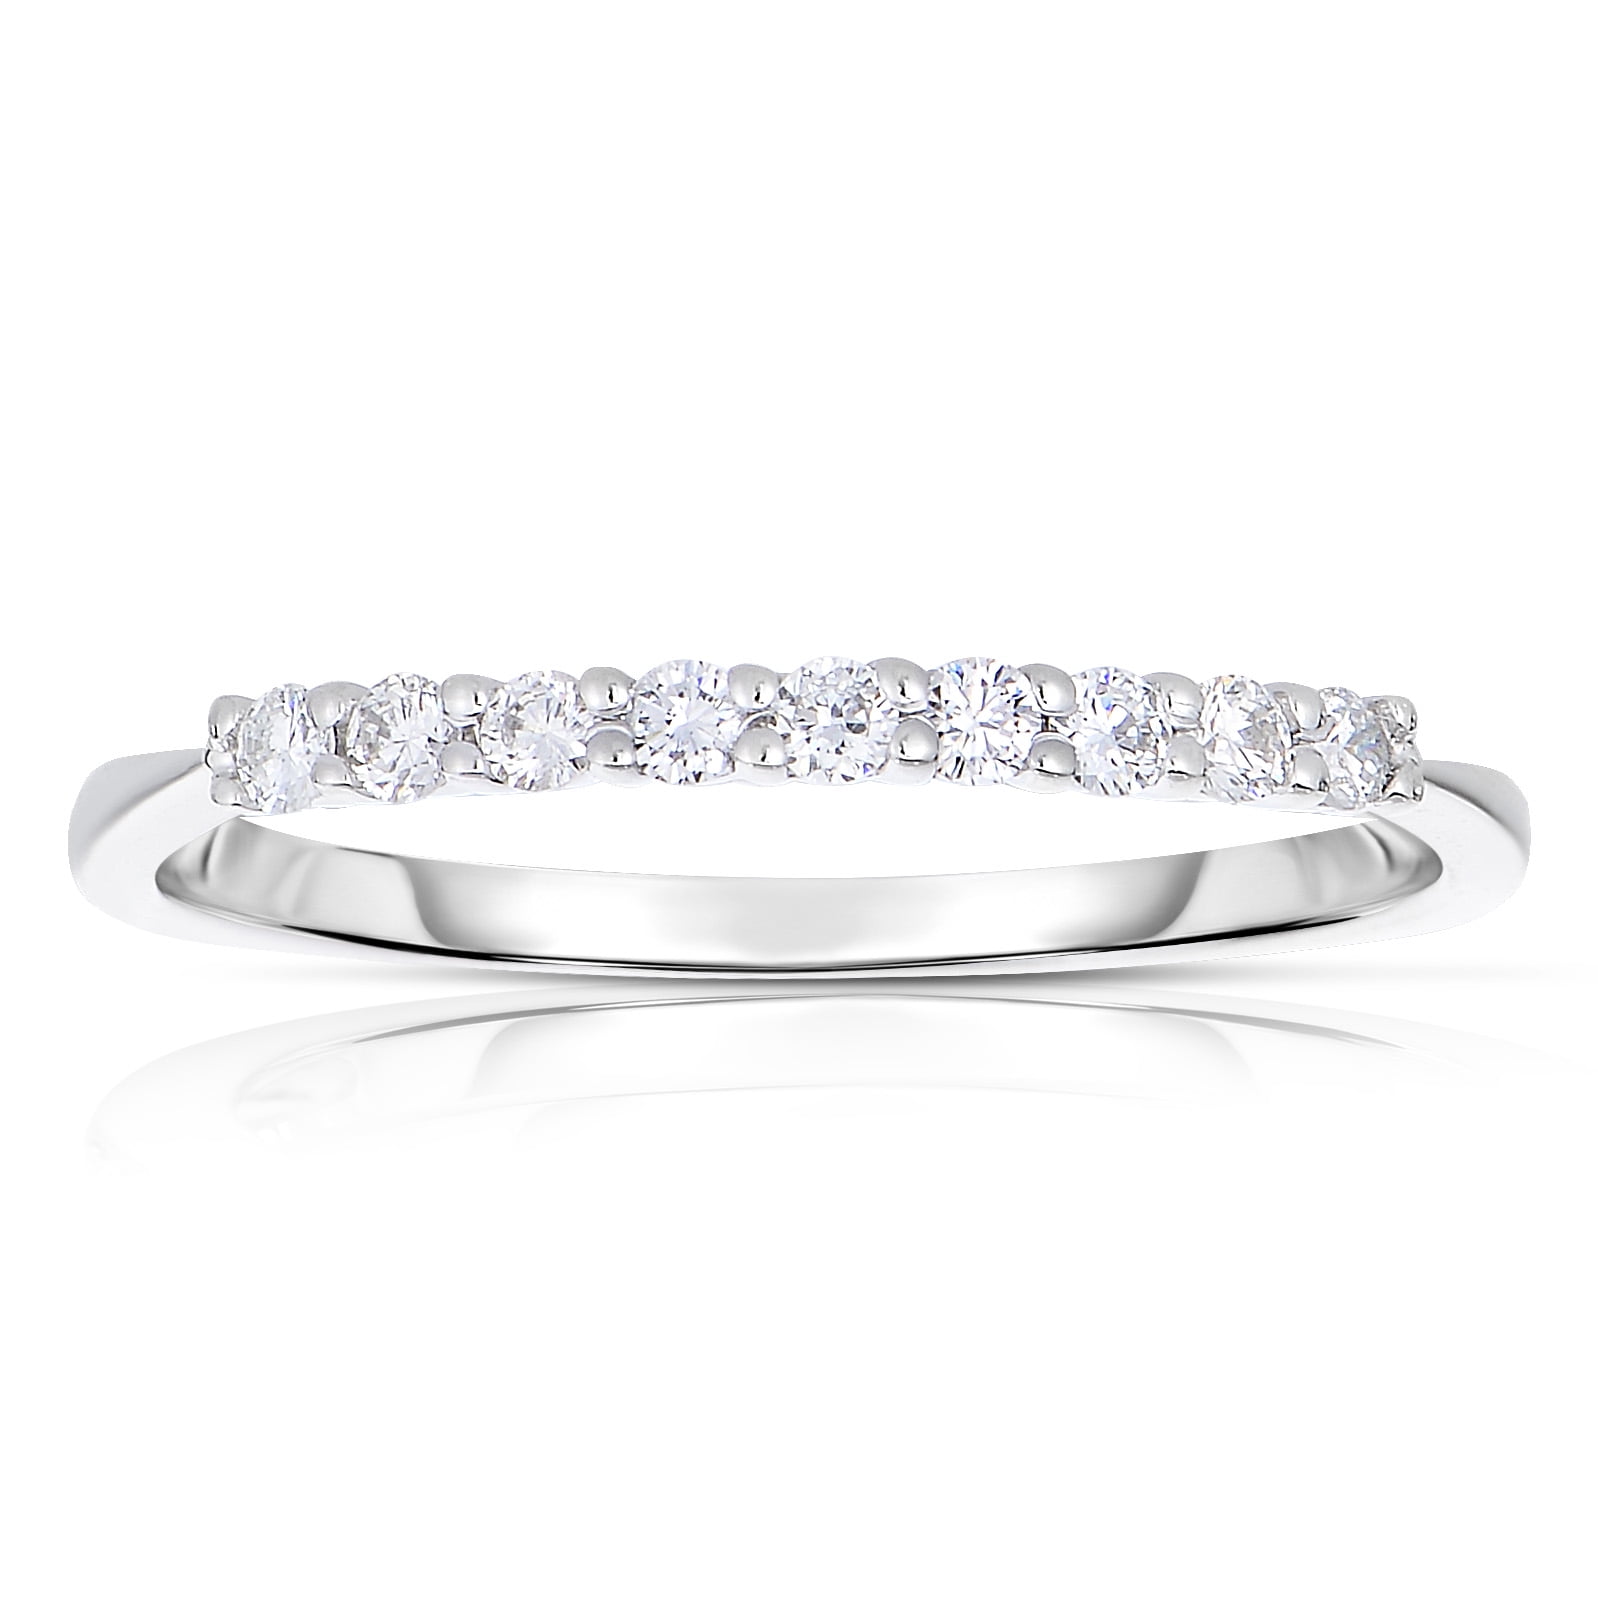 Vir Jewels 1/5 cttw Classic Diamond Wedding Band in 10K White Gold Channel Set 